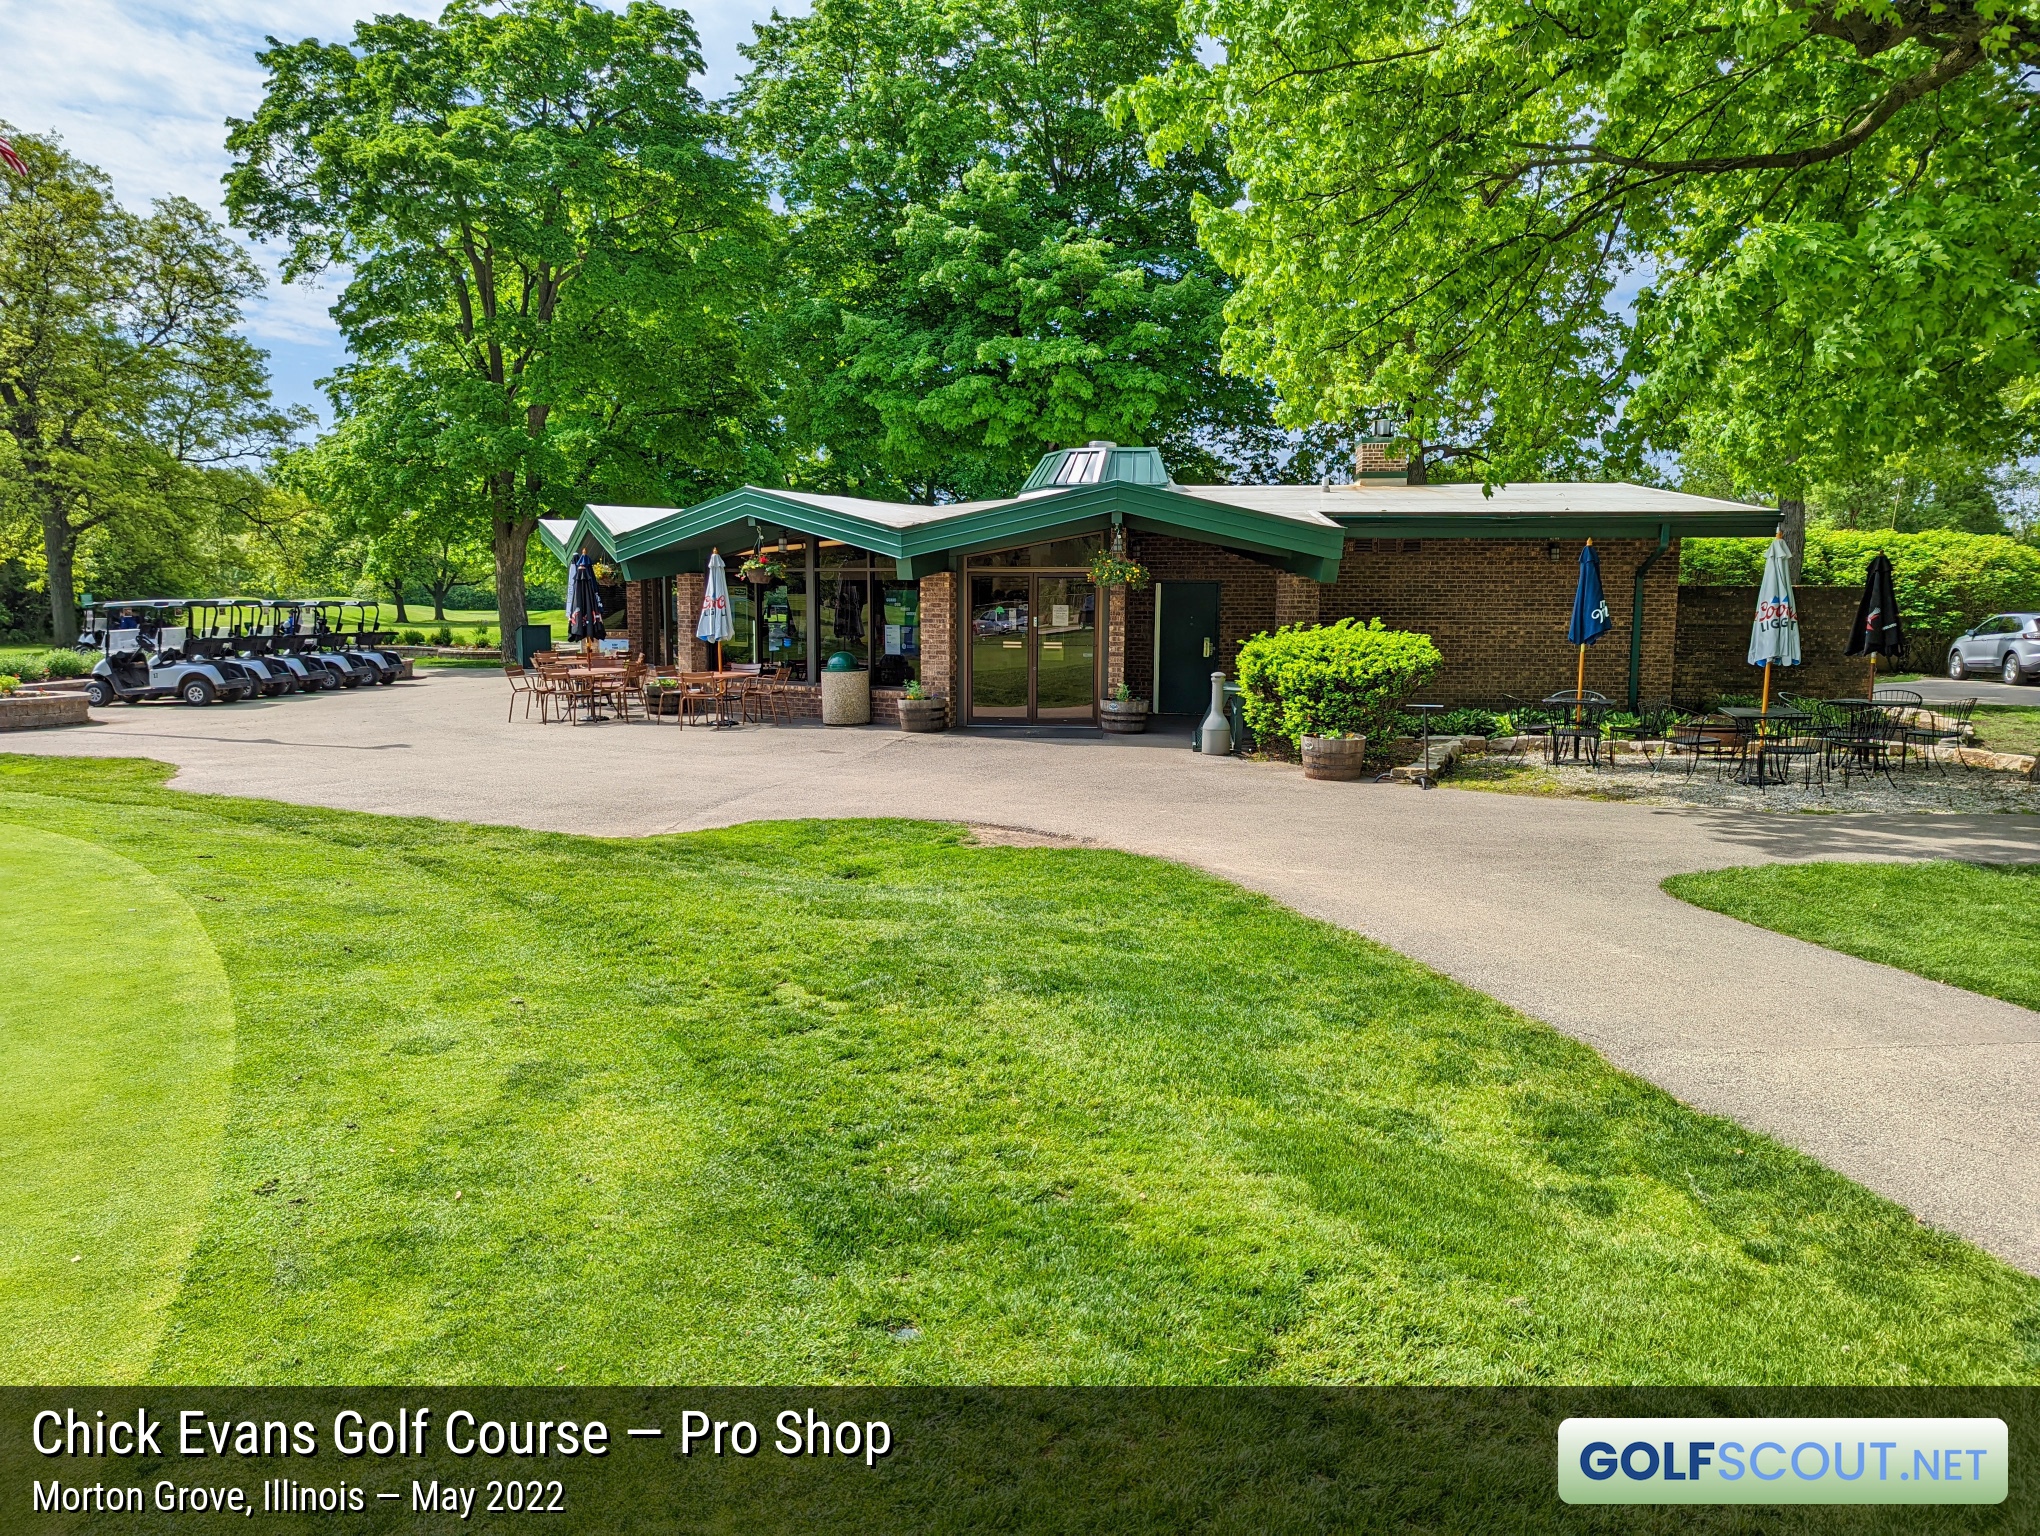 Photo of the pro shop at Chick Evans Golf Course in Morton Grove, Illinois. There's no separate clubhouse at Chick Evans. Bathrooms are inside the pro shop building.